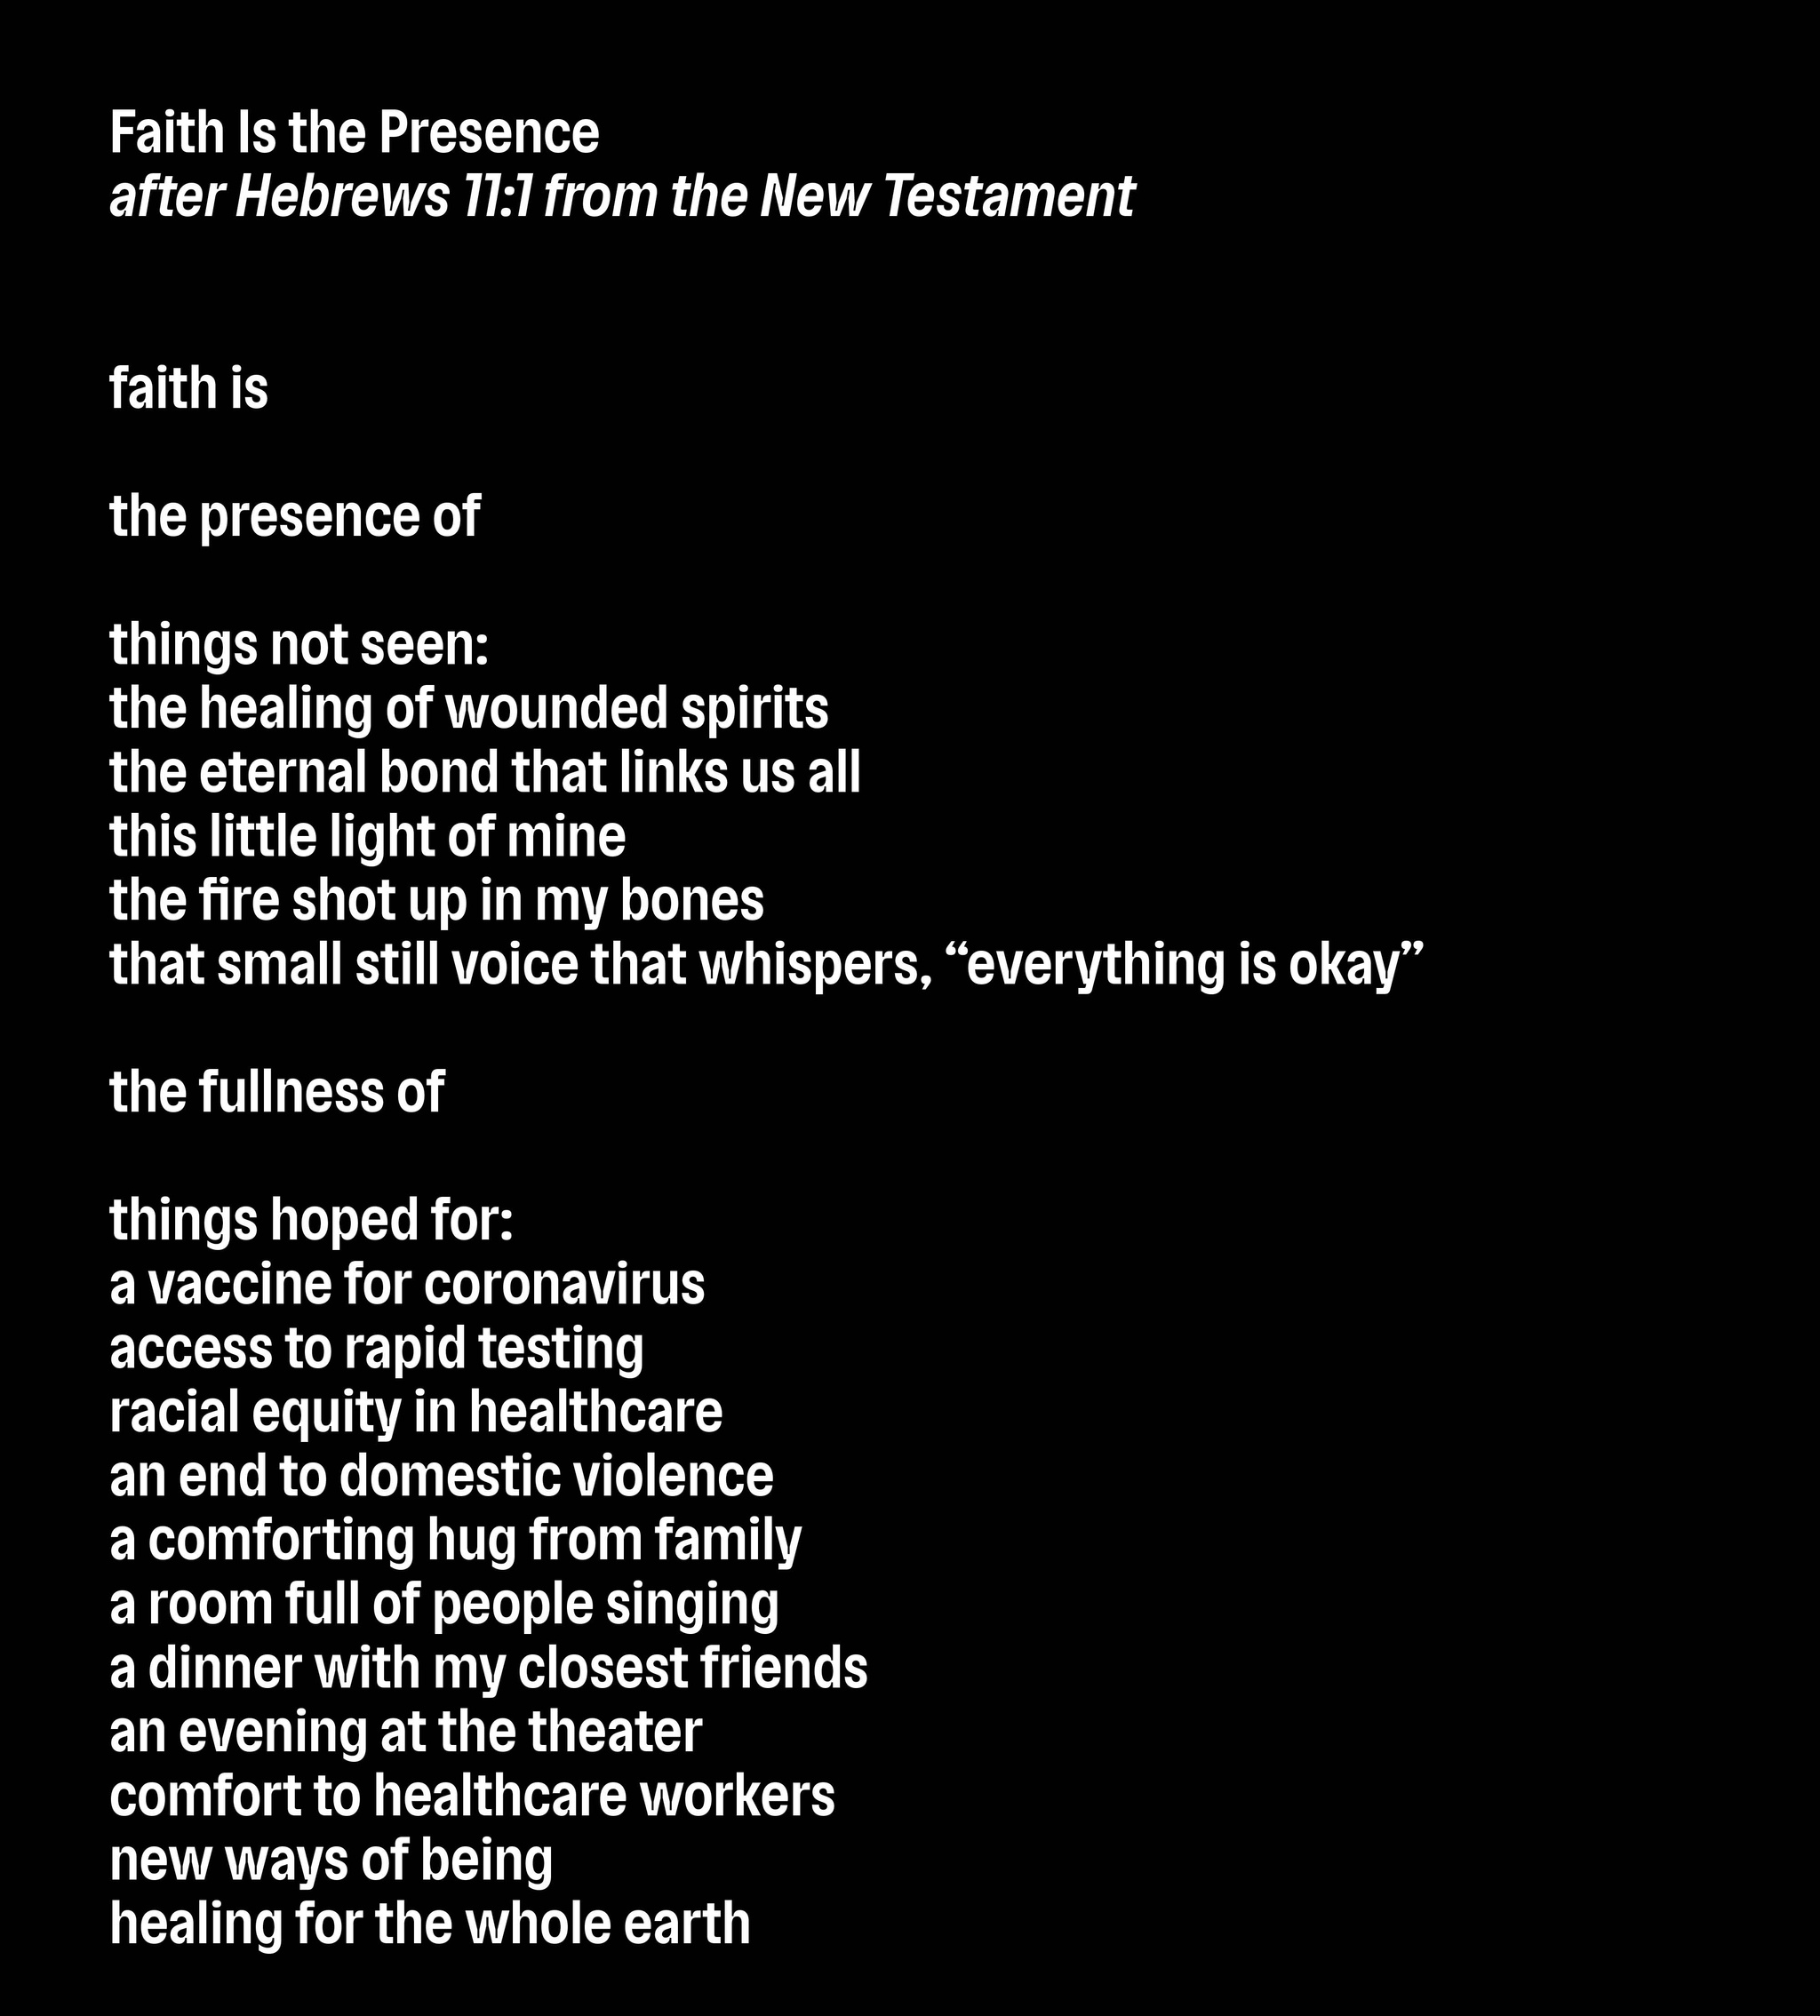 The text of the poem Faith is the Fullness by Troy Anthony and Jerome Ellis in white type on a black background